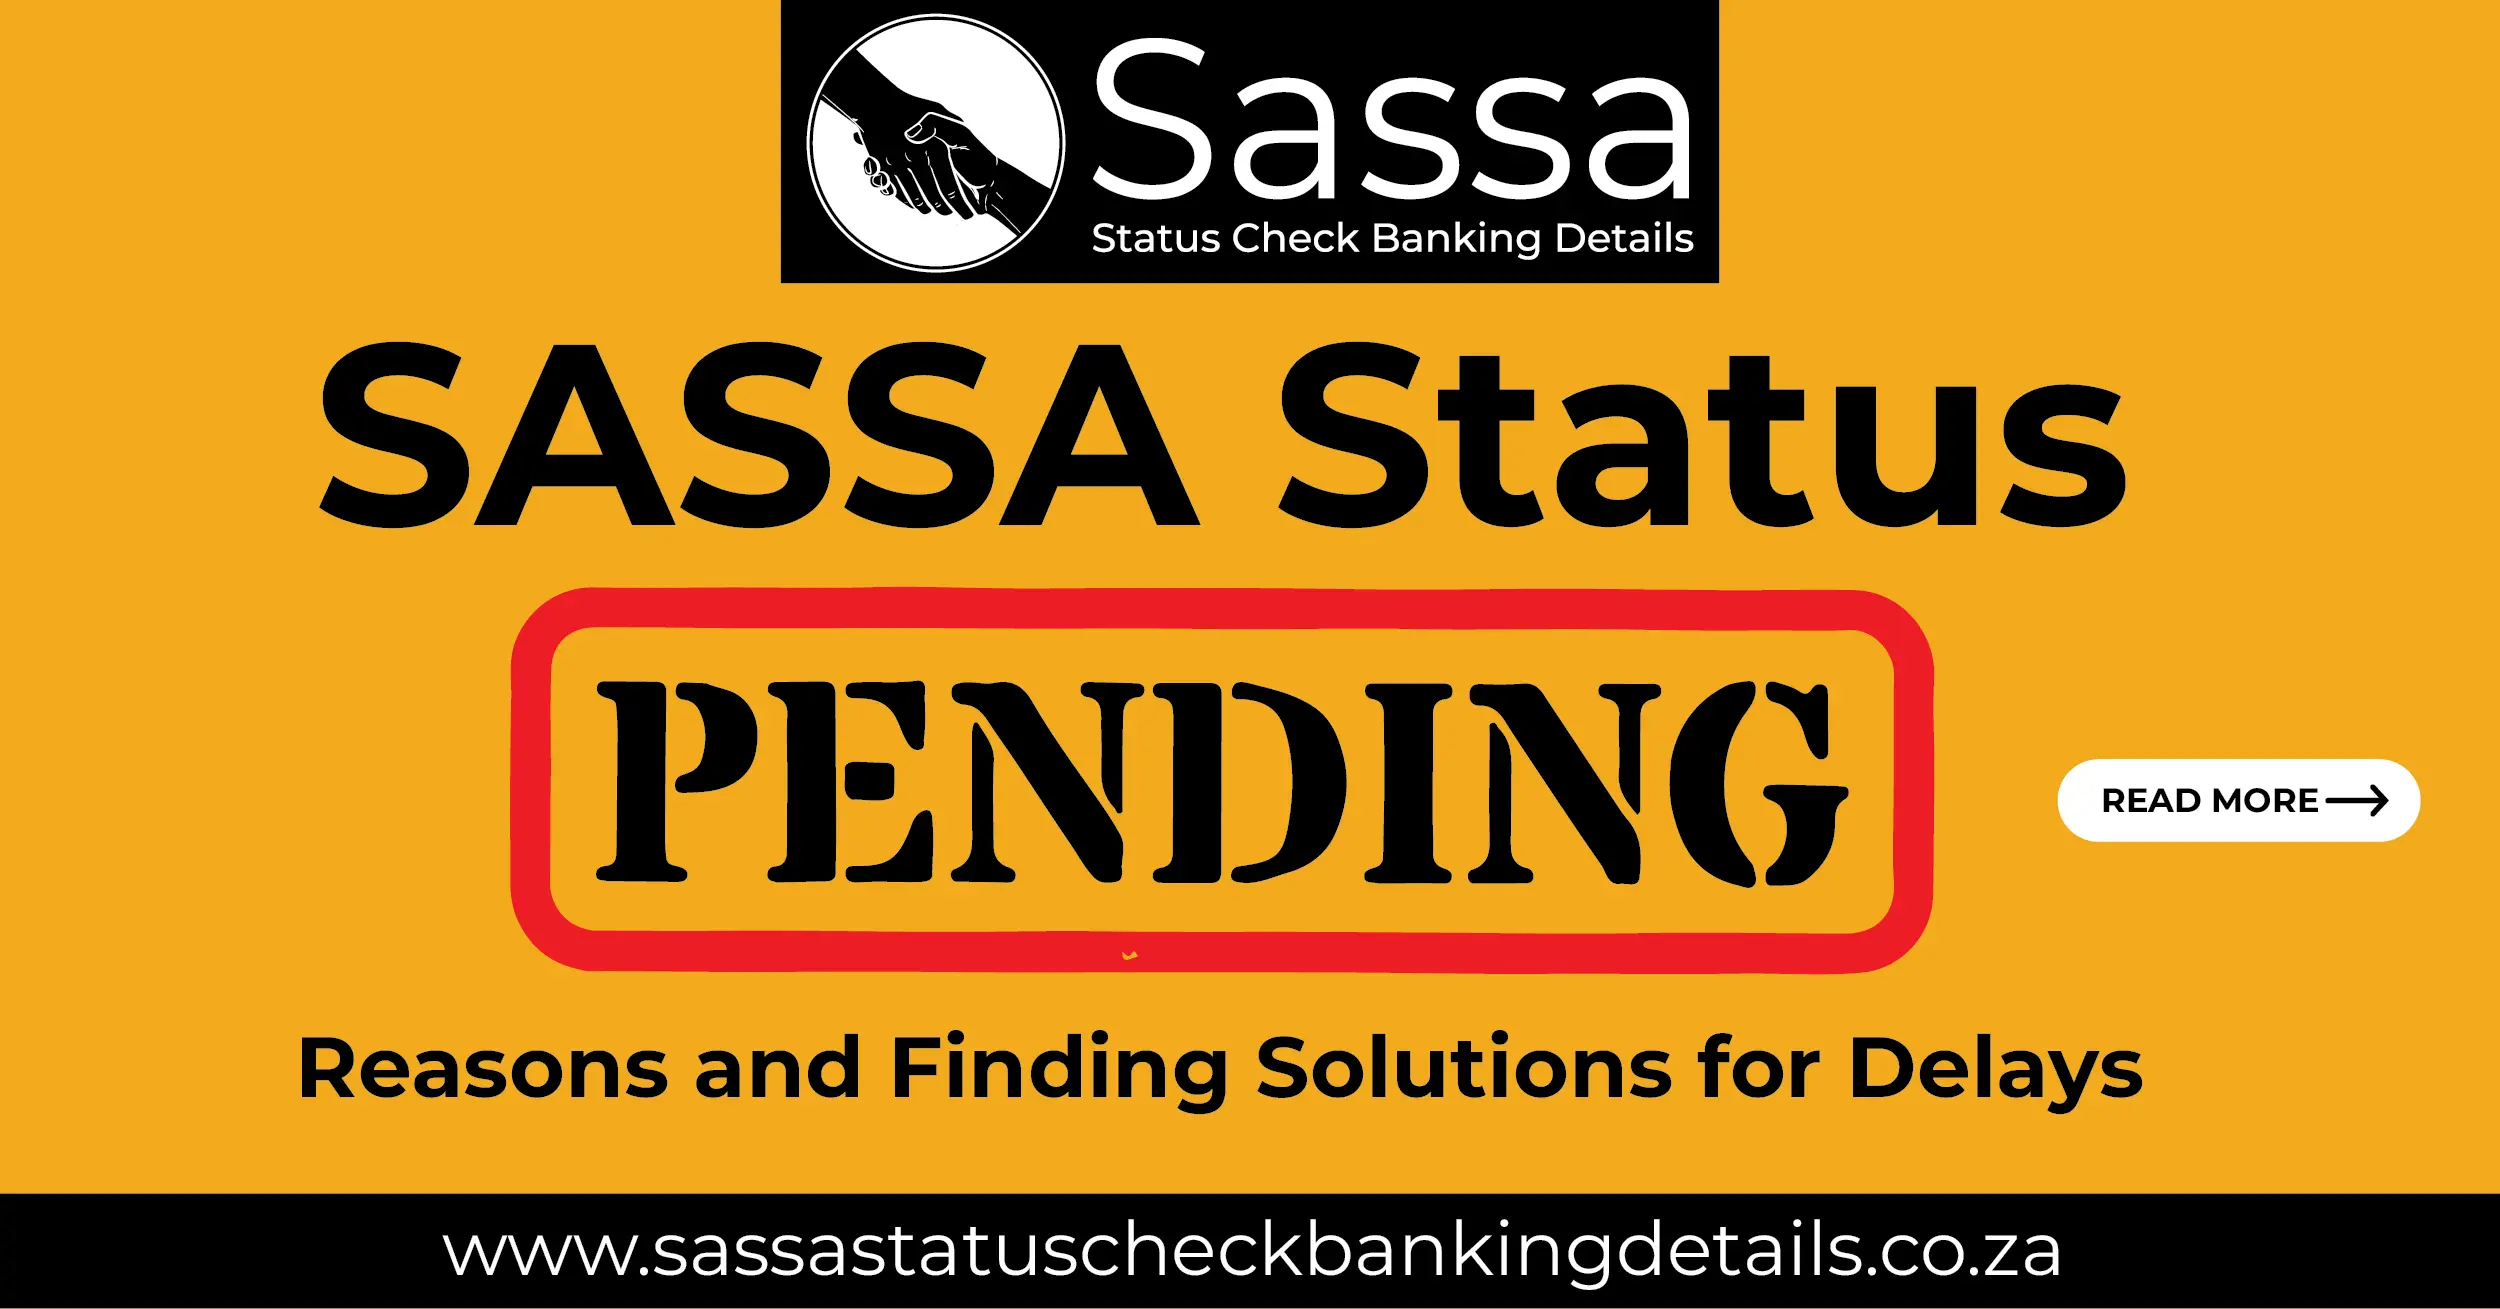 SASSA Status Pending: Reasons and Finding Solutions for Delays